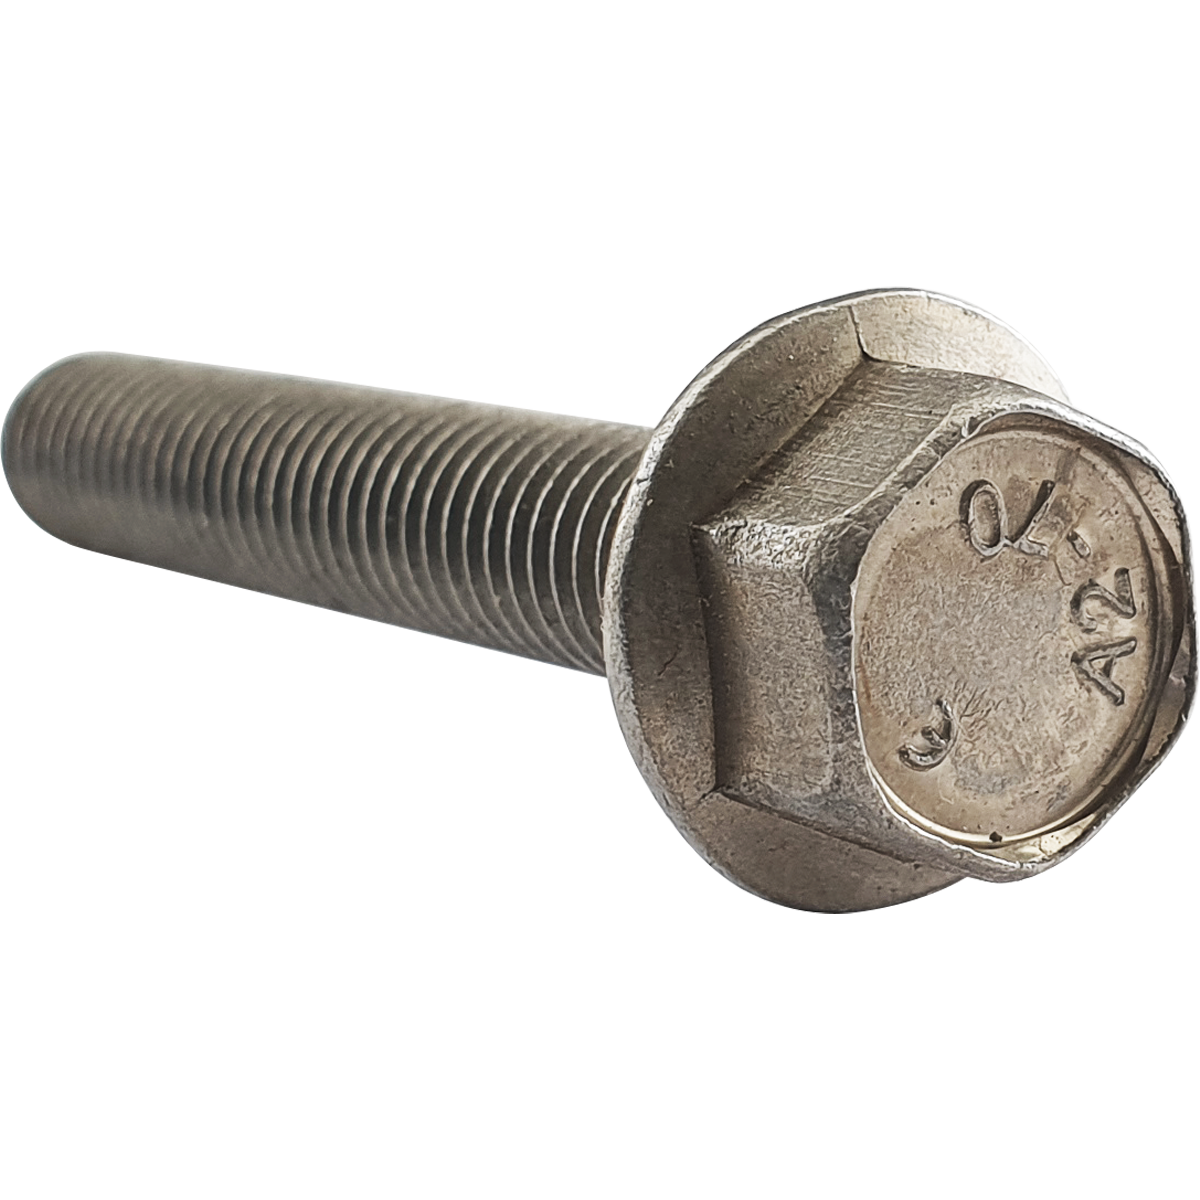 Flanged hex bolts, also know as flanged hexagon bolts available in various sizes and manufactured in A2 stainless steel for a high level of corrosion resistance